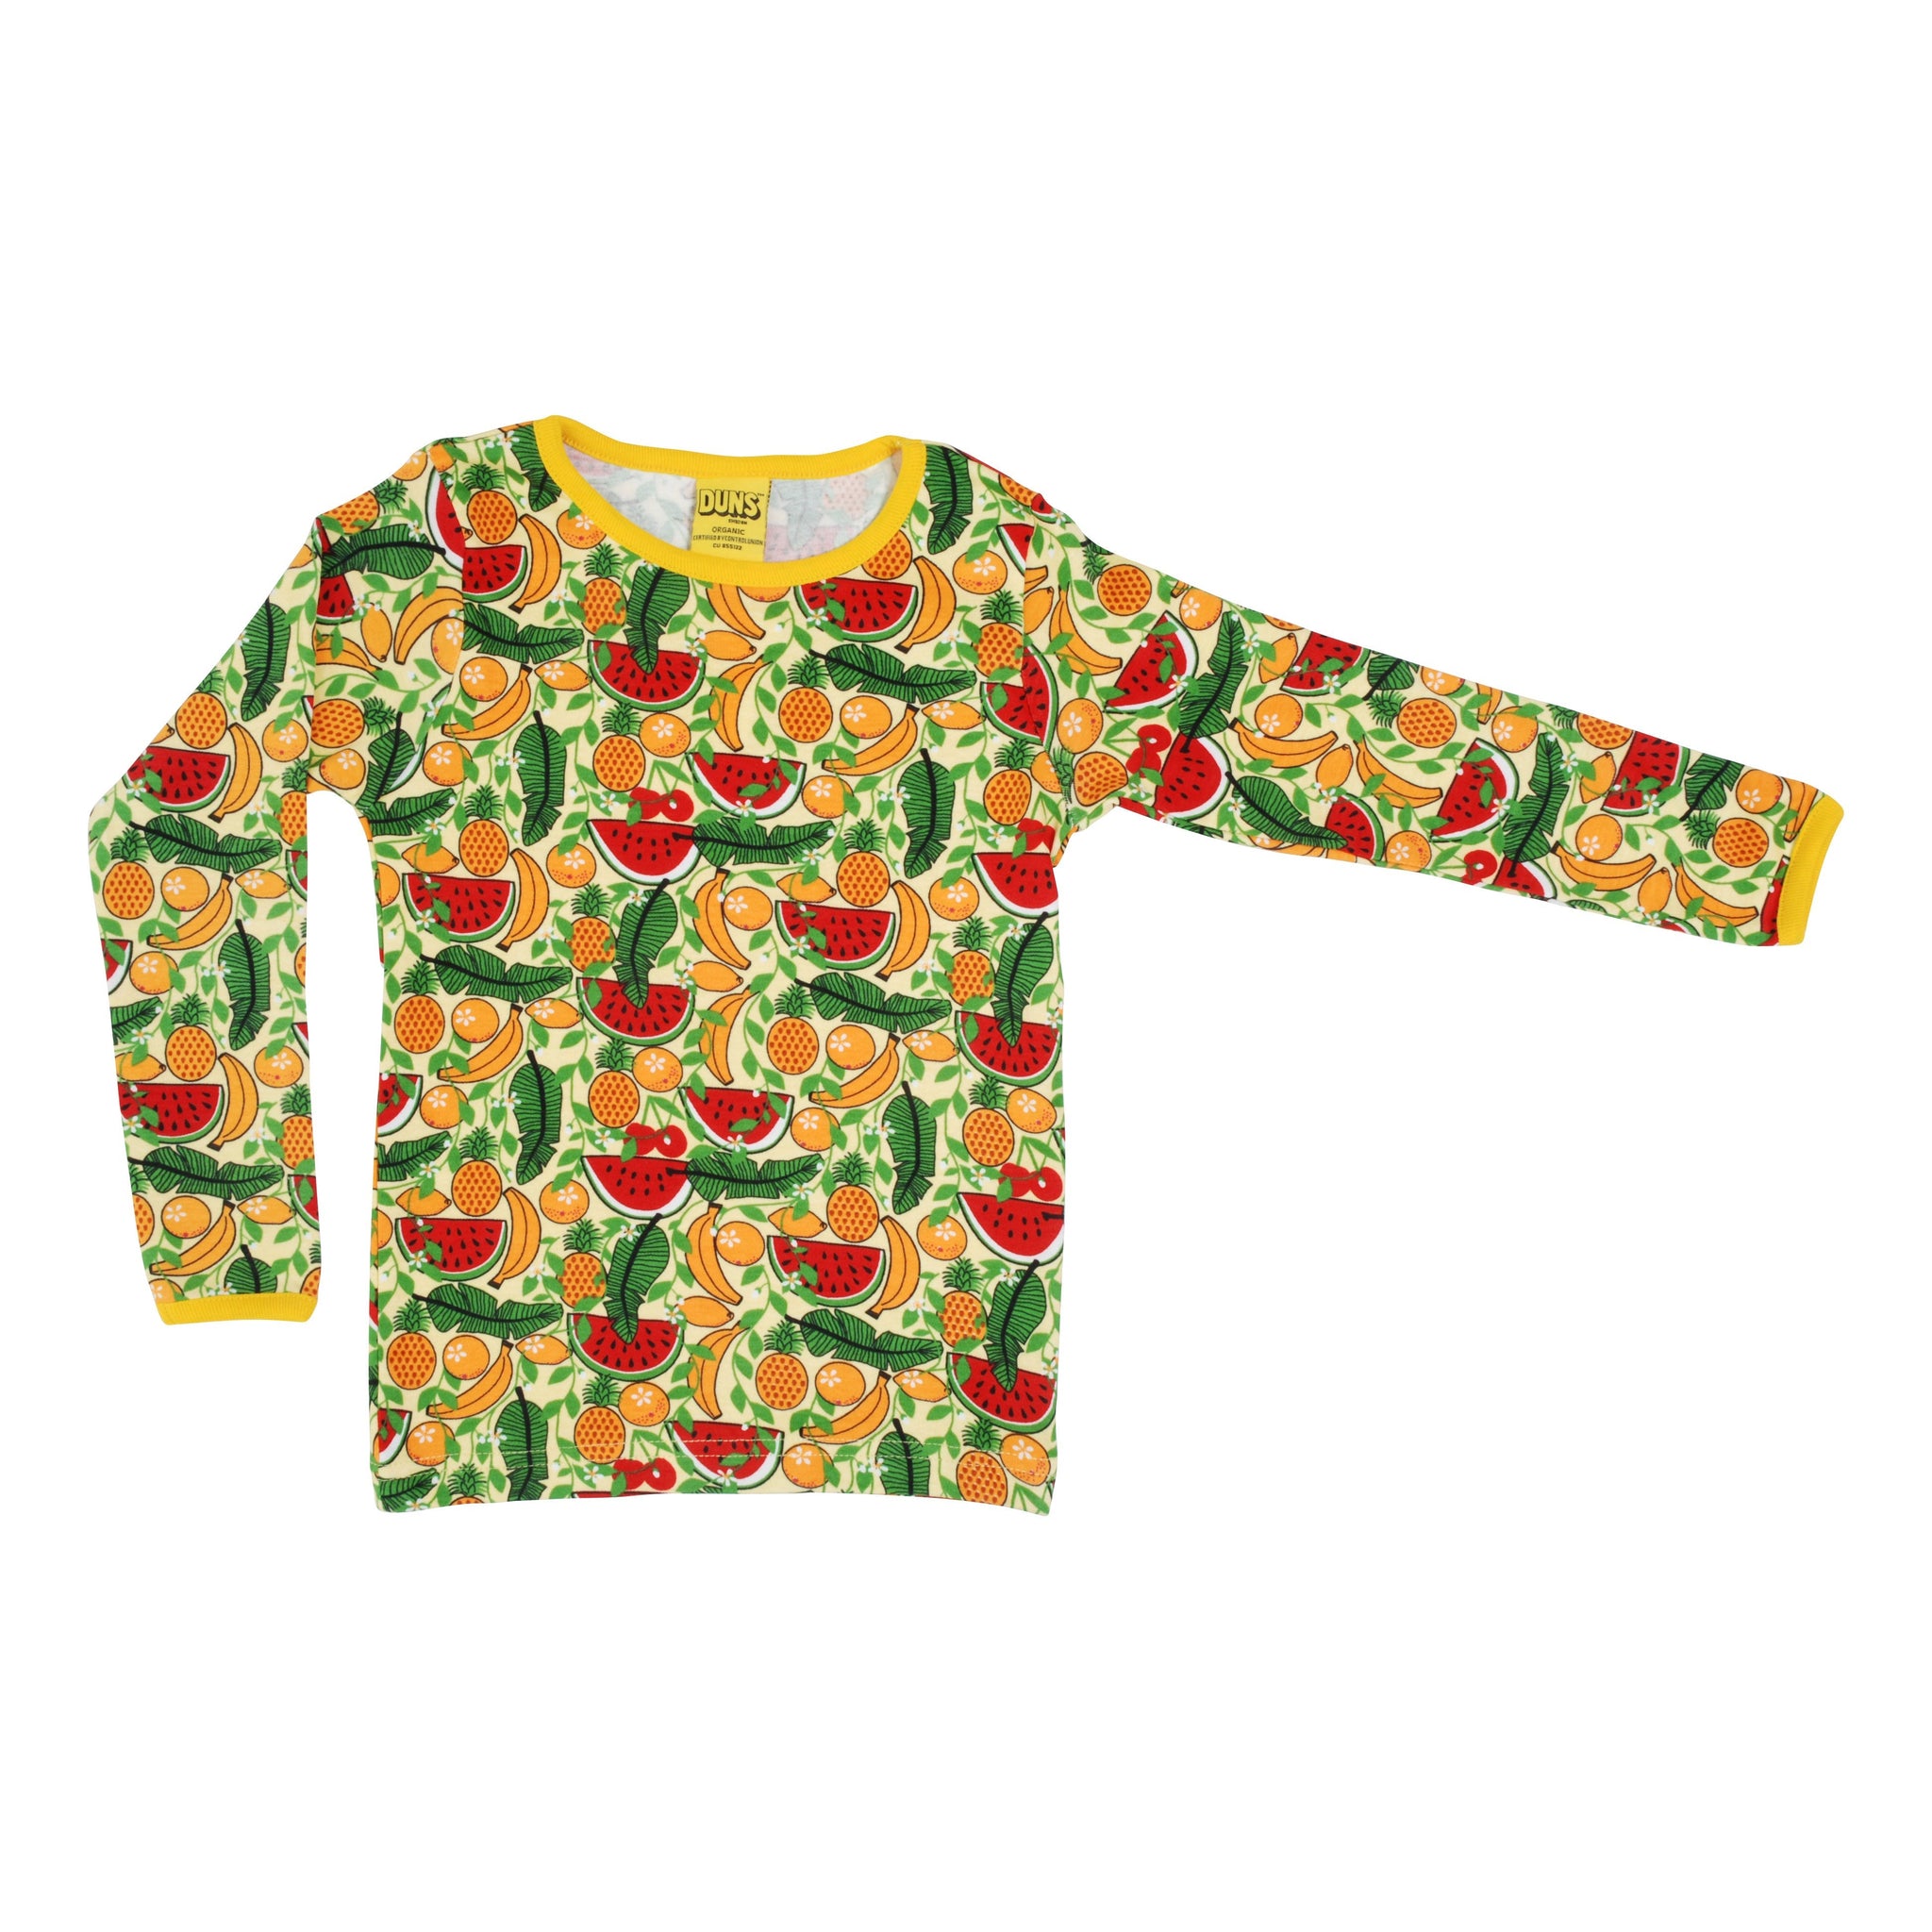 DUNS Sweden - Tropical Long Sleeved Top